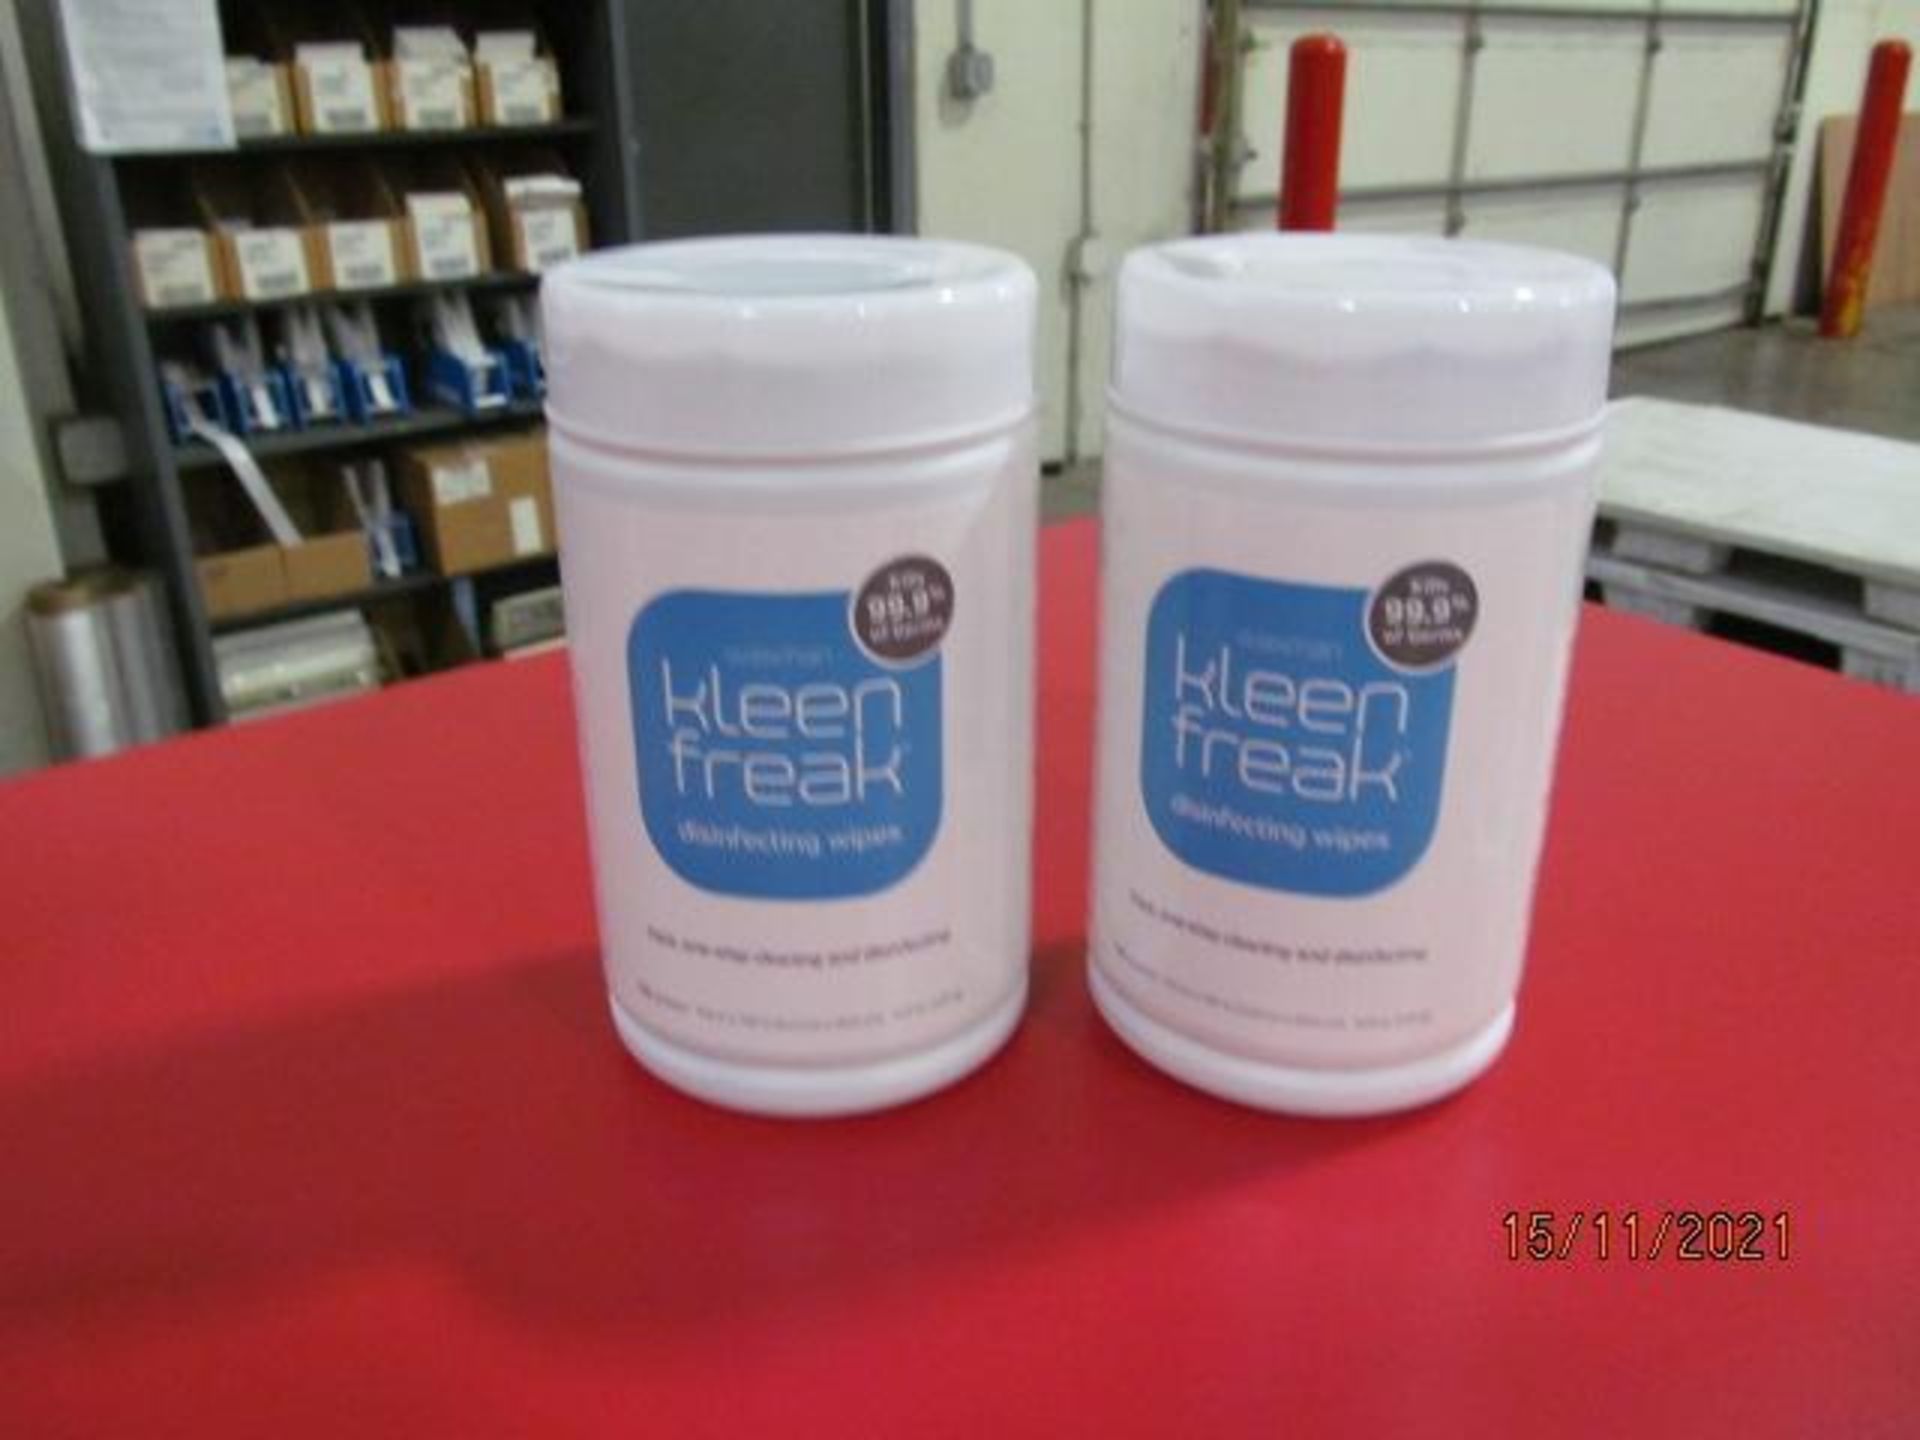 Lot of Waxman Kleen Freak Sanitizing Wipes consisting of 33,696 packages on 52 pallets. Each package - Image 4 of 11